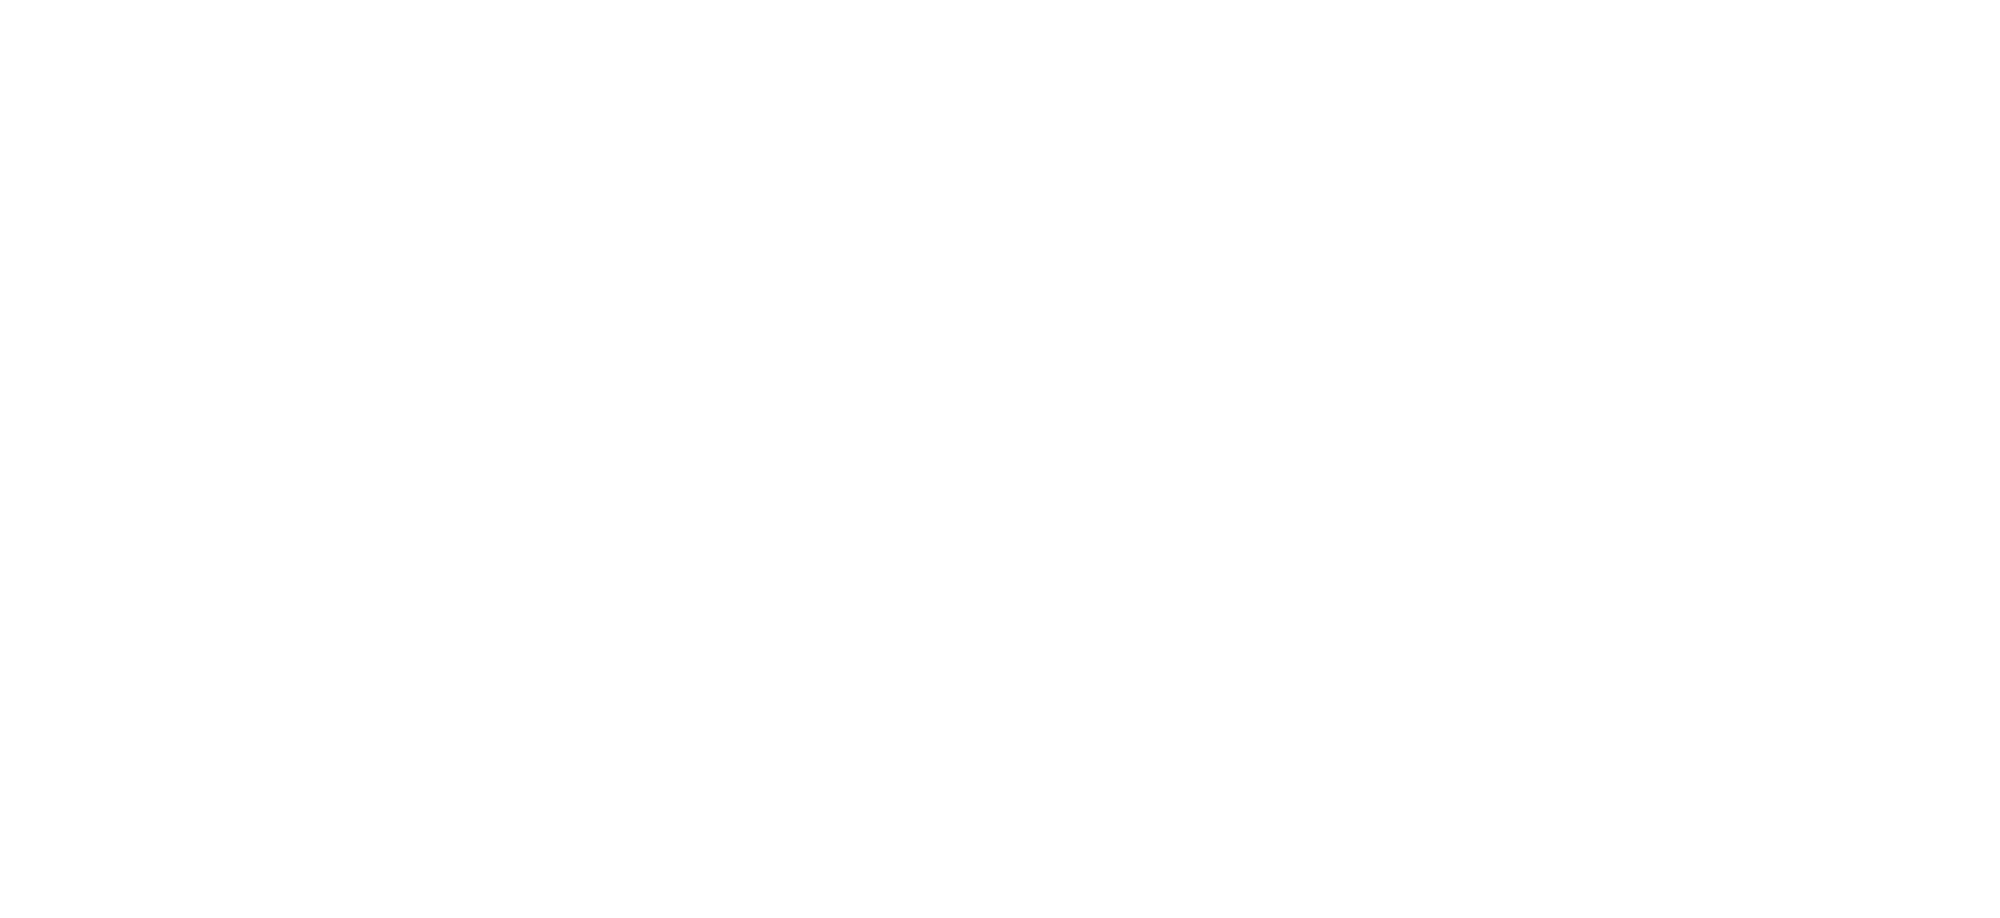 typographic logo with two corner border edges that surround the word